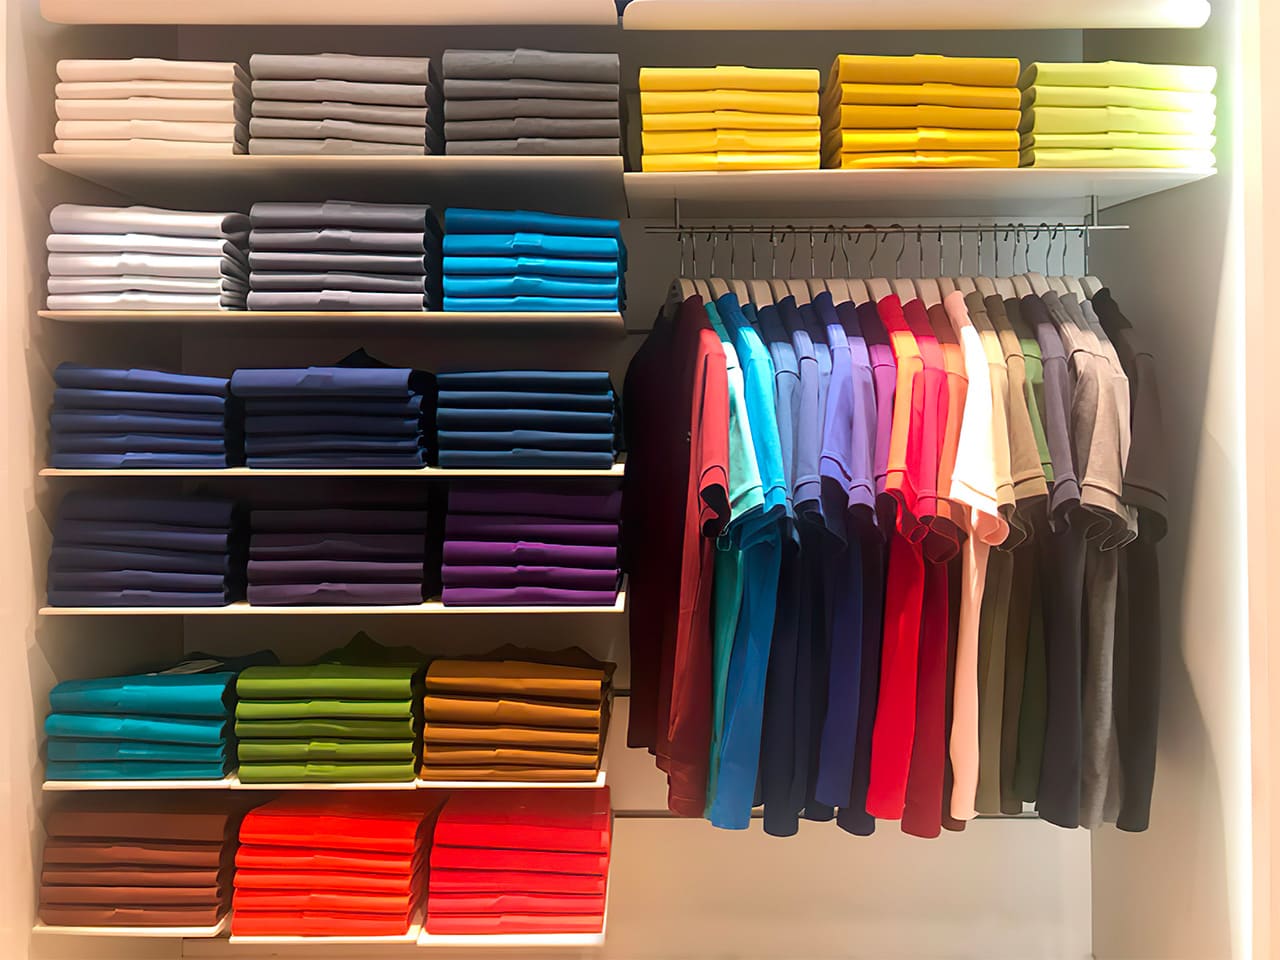 Ralph Lauren Polo shirts in 24 colors